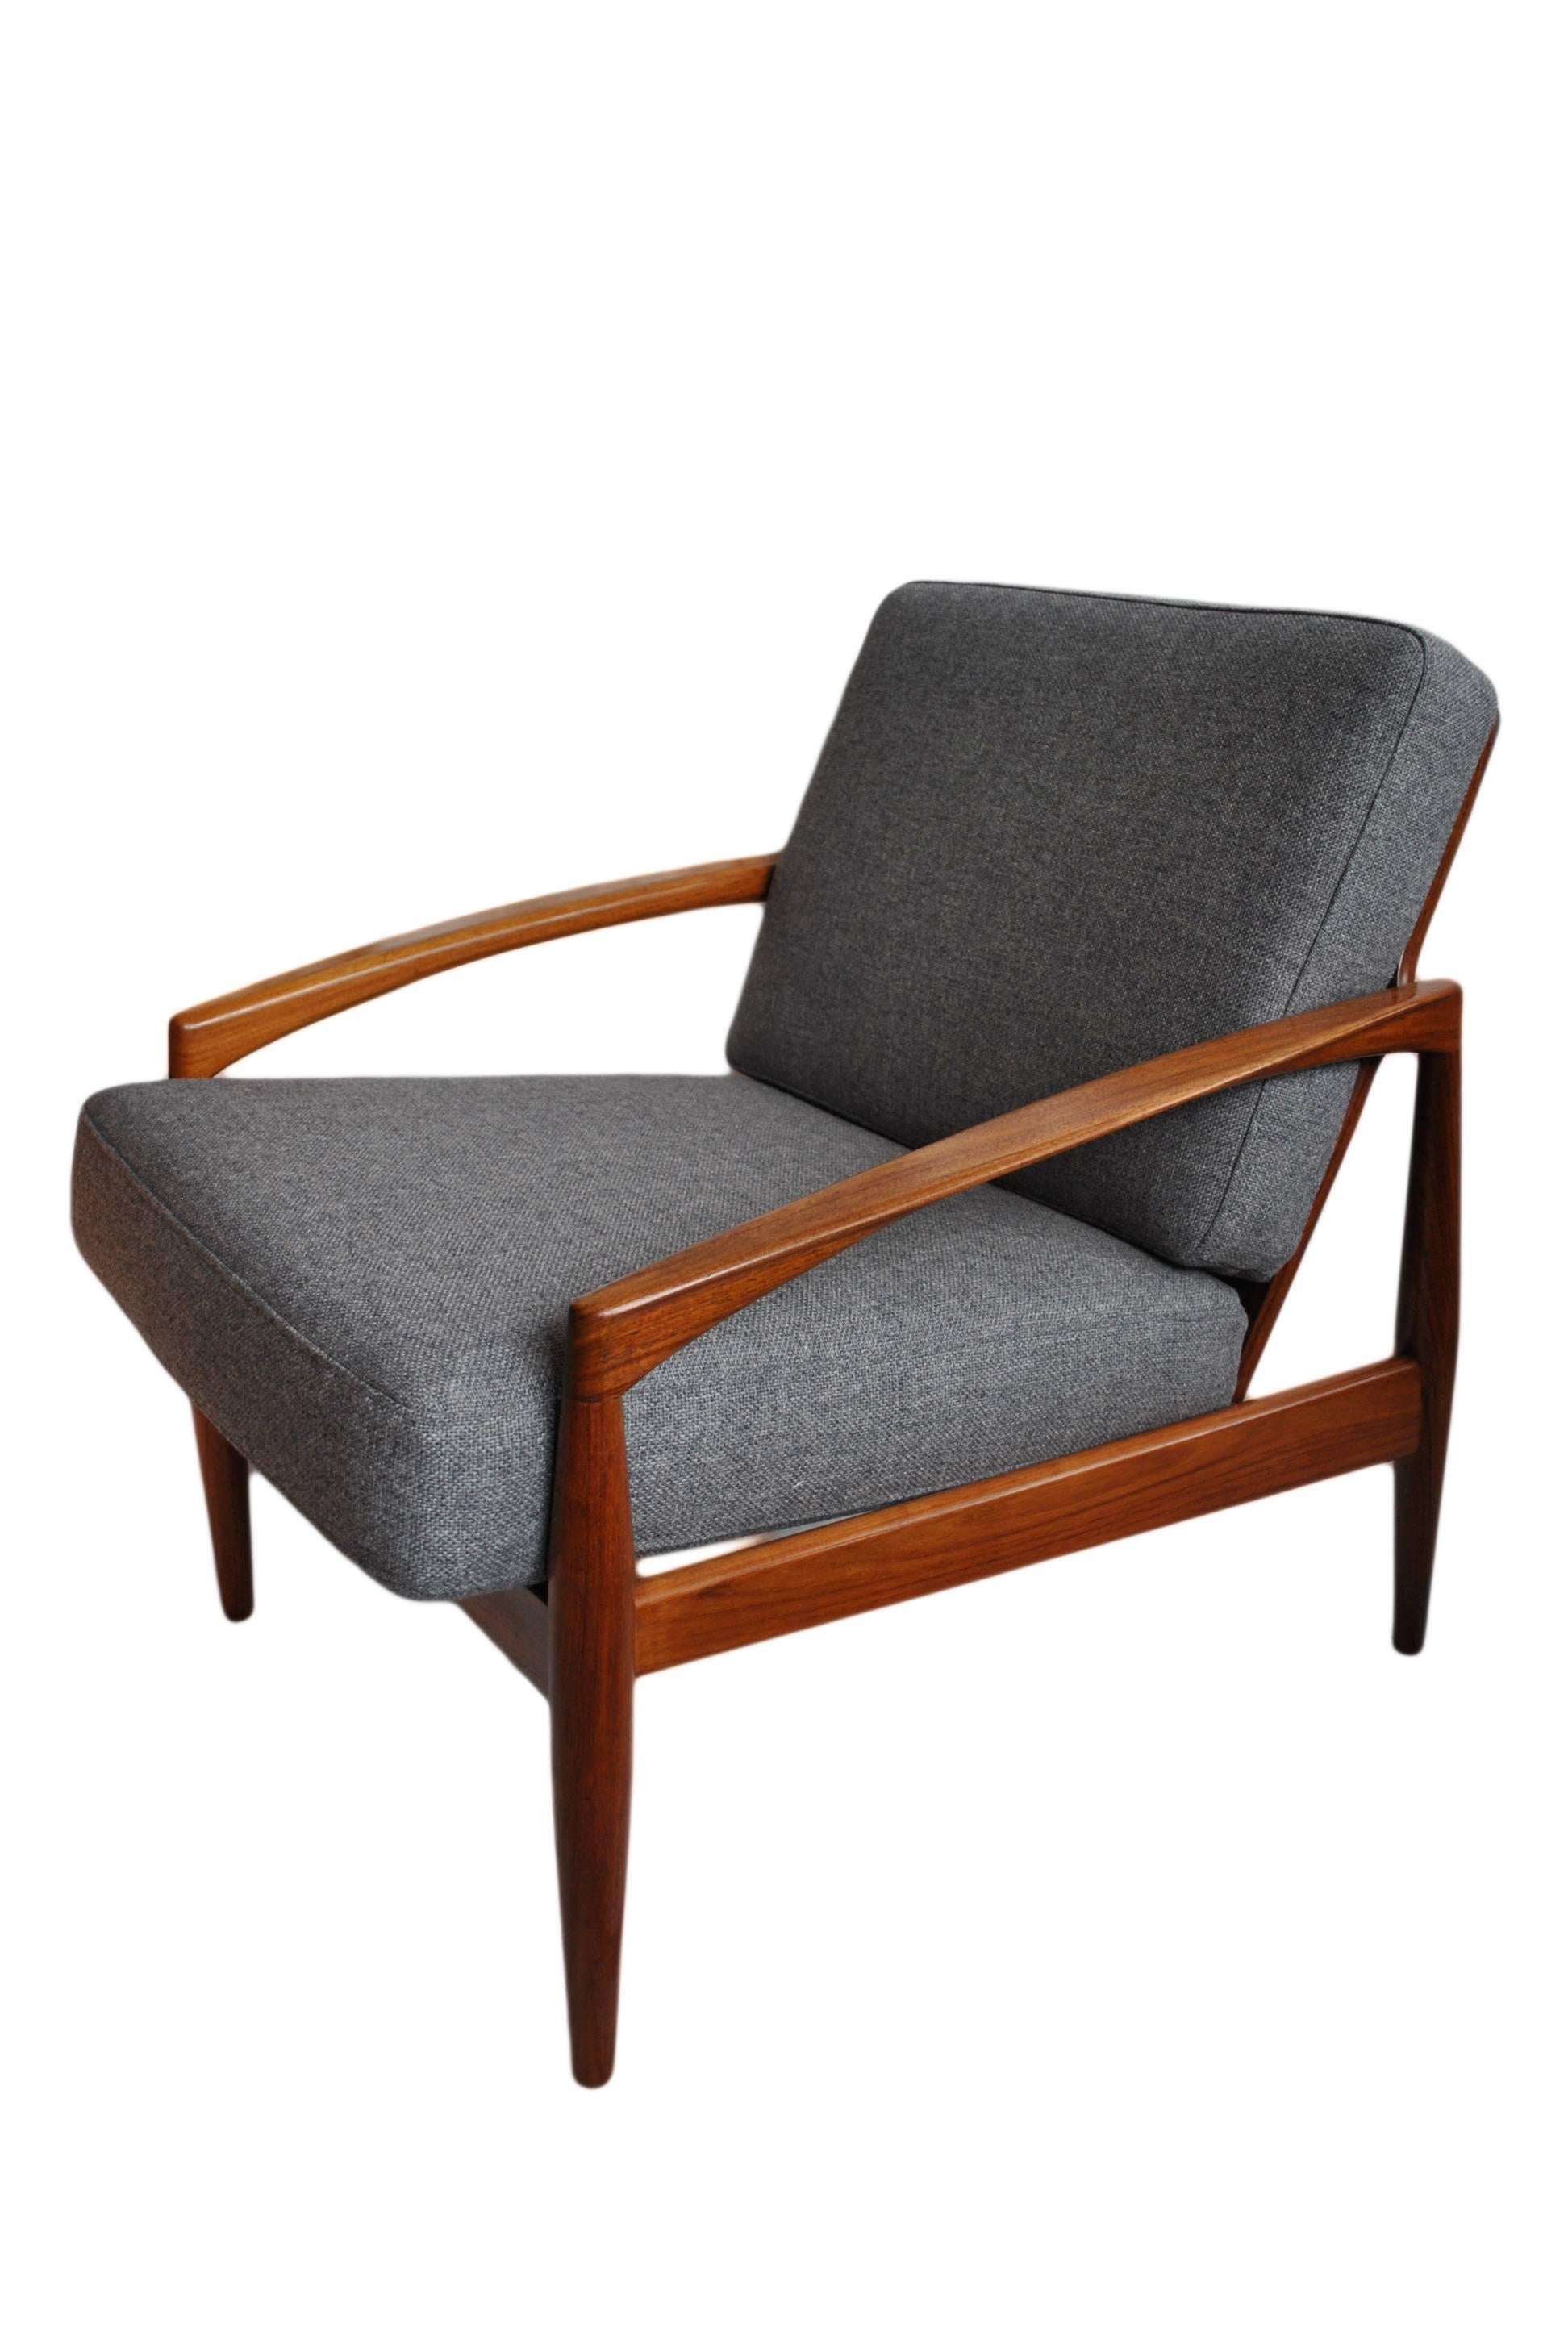 Rare rosewood paperknife armchair designed by Kai Kristiansen. Produced by Magnus Olesen, Denmark, circa 1960. Lovely light coloured rosewood -
repolished frame and with new camira weave upholstery. Other upholstery options available - please feel